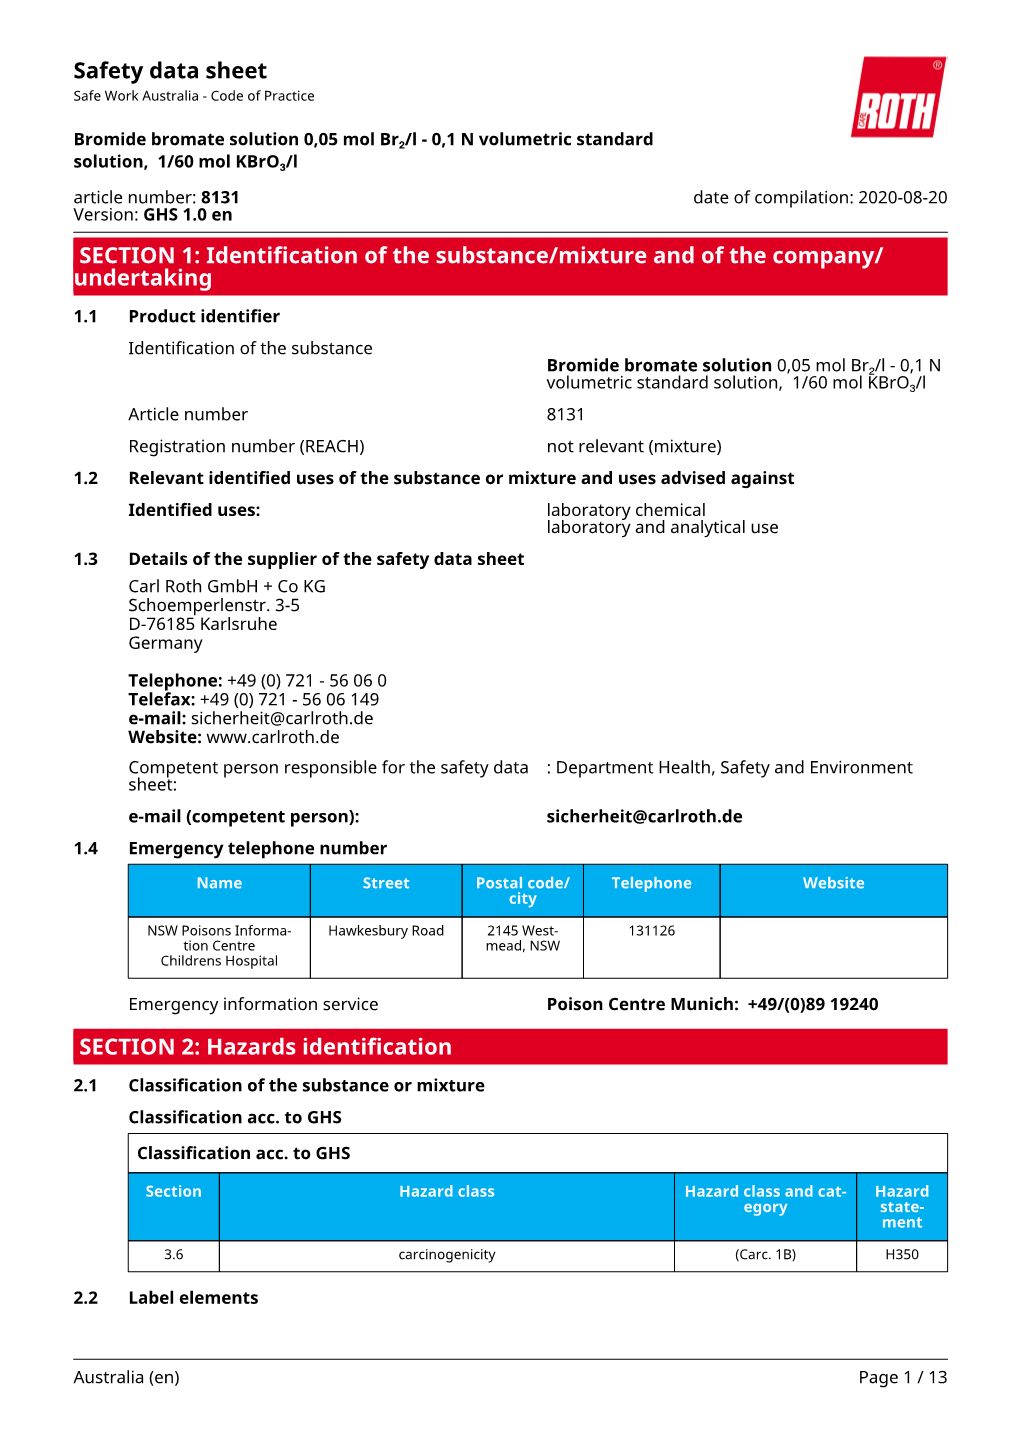 Safety Data Sheet: Bromide Bromate Solution